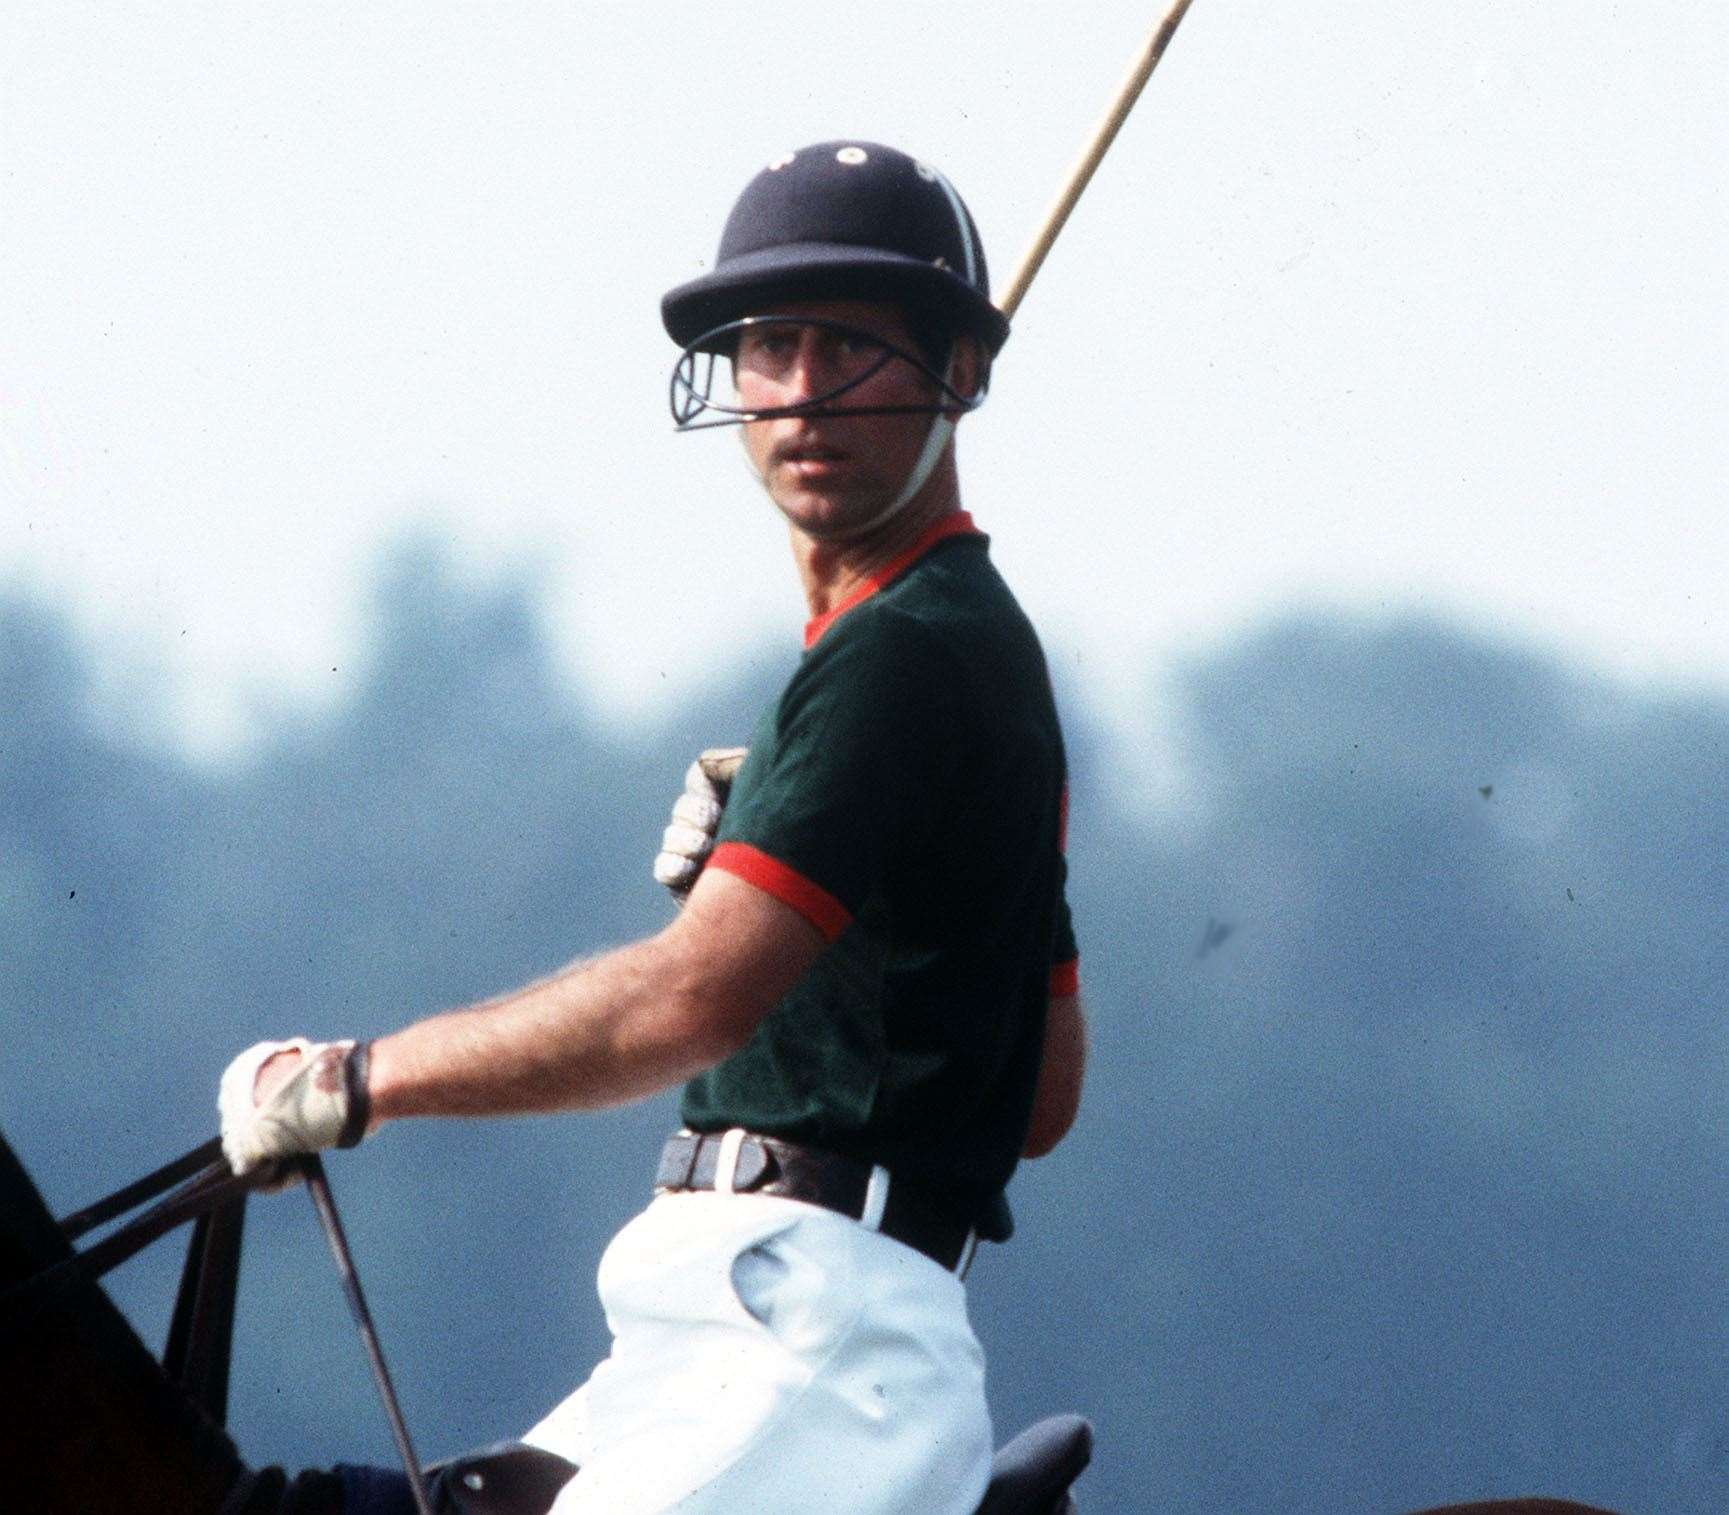 Charles playing polo in 1984 (PA)